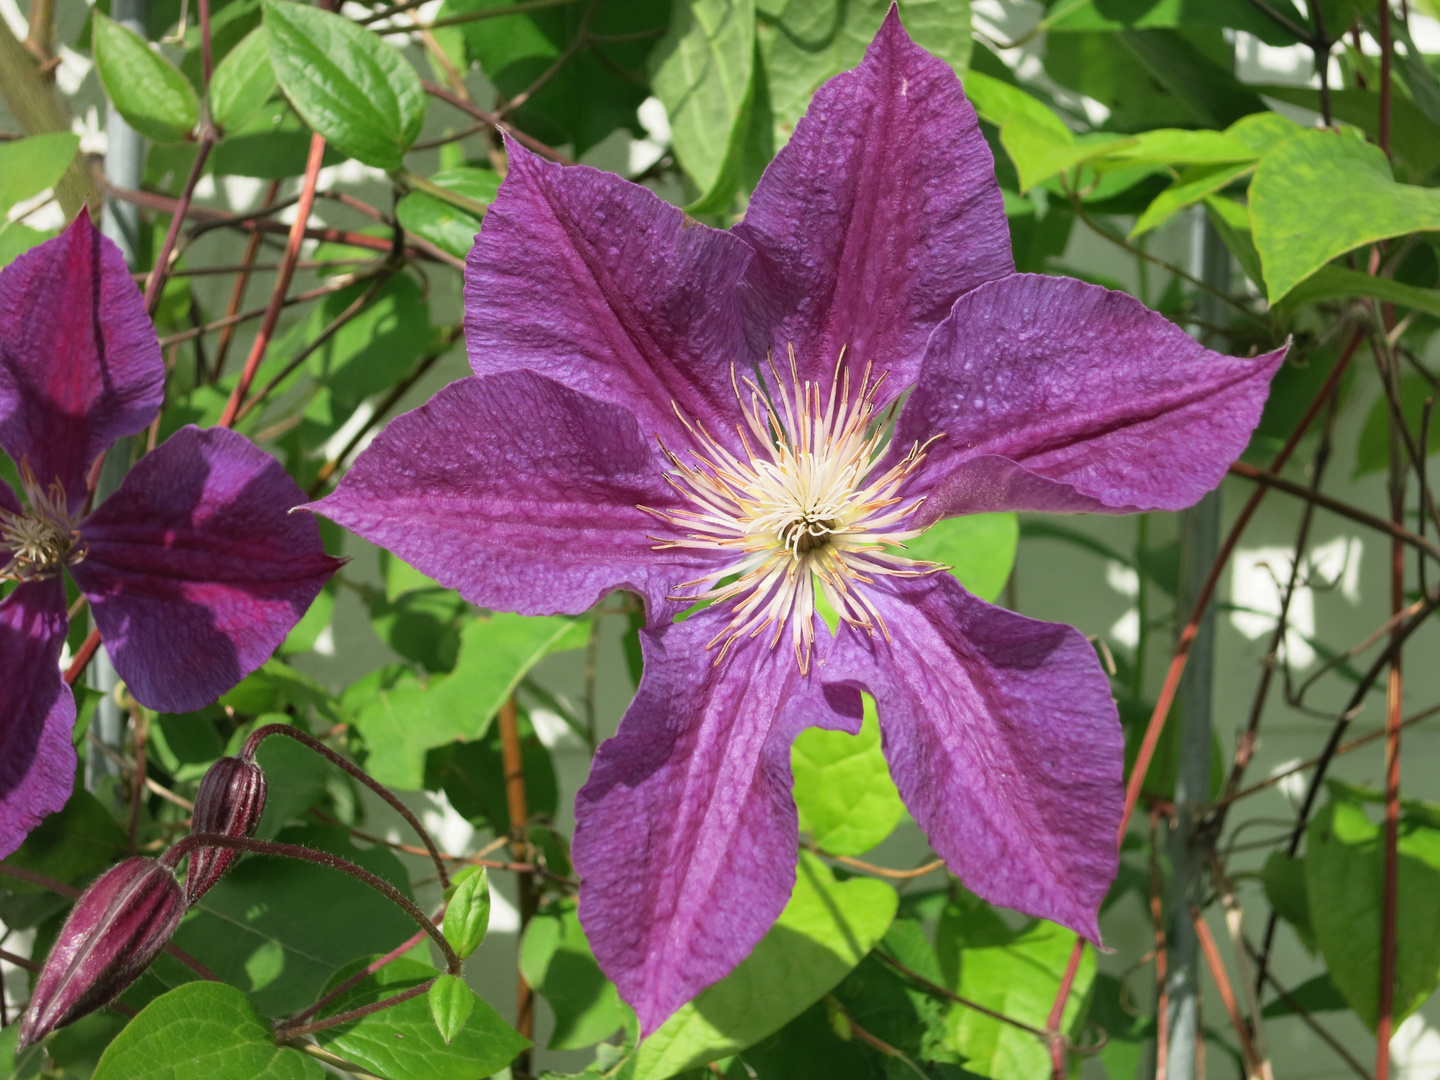 Clematis "le president"